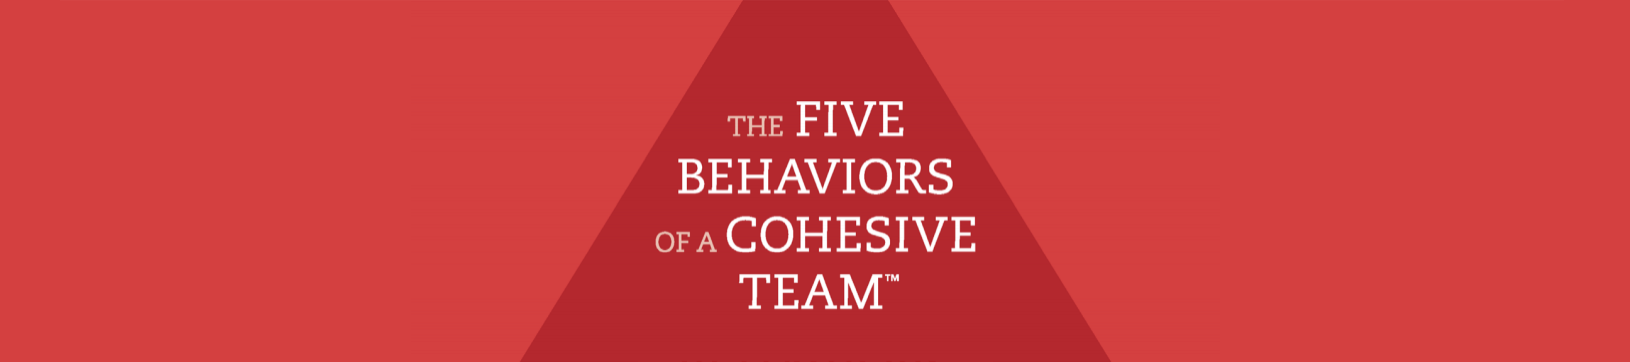 The Five Behaviors of a Cohesive Team